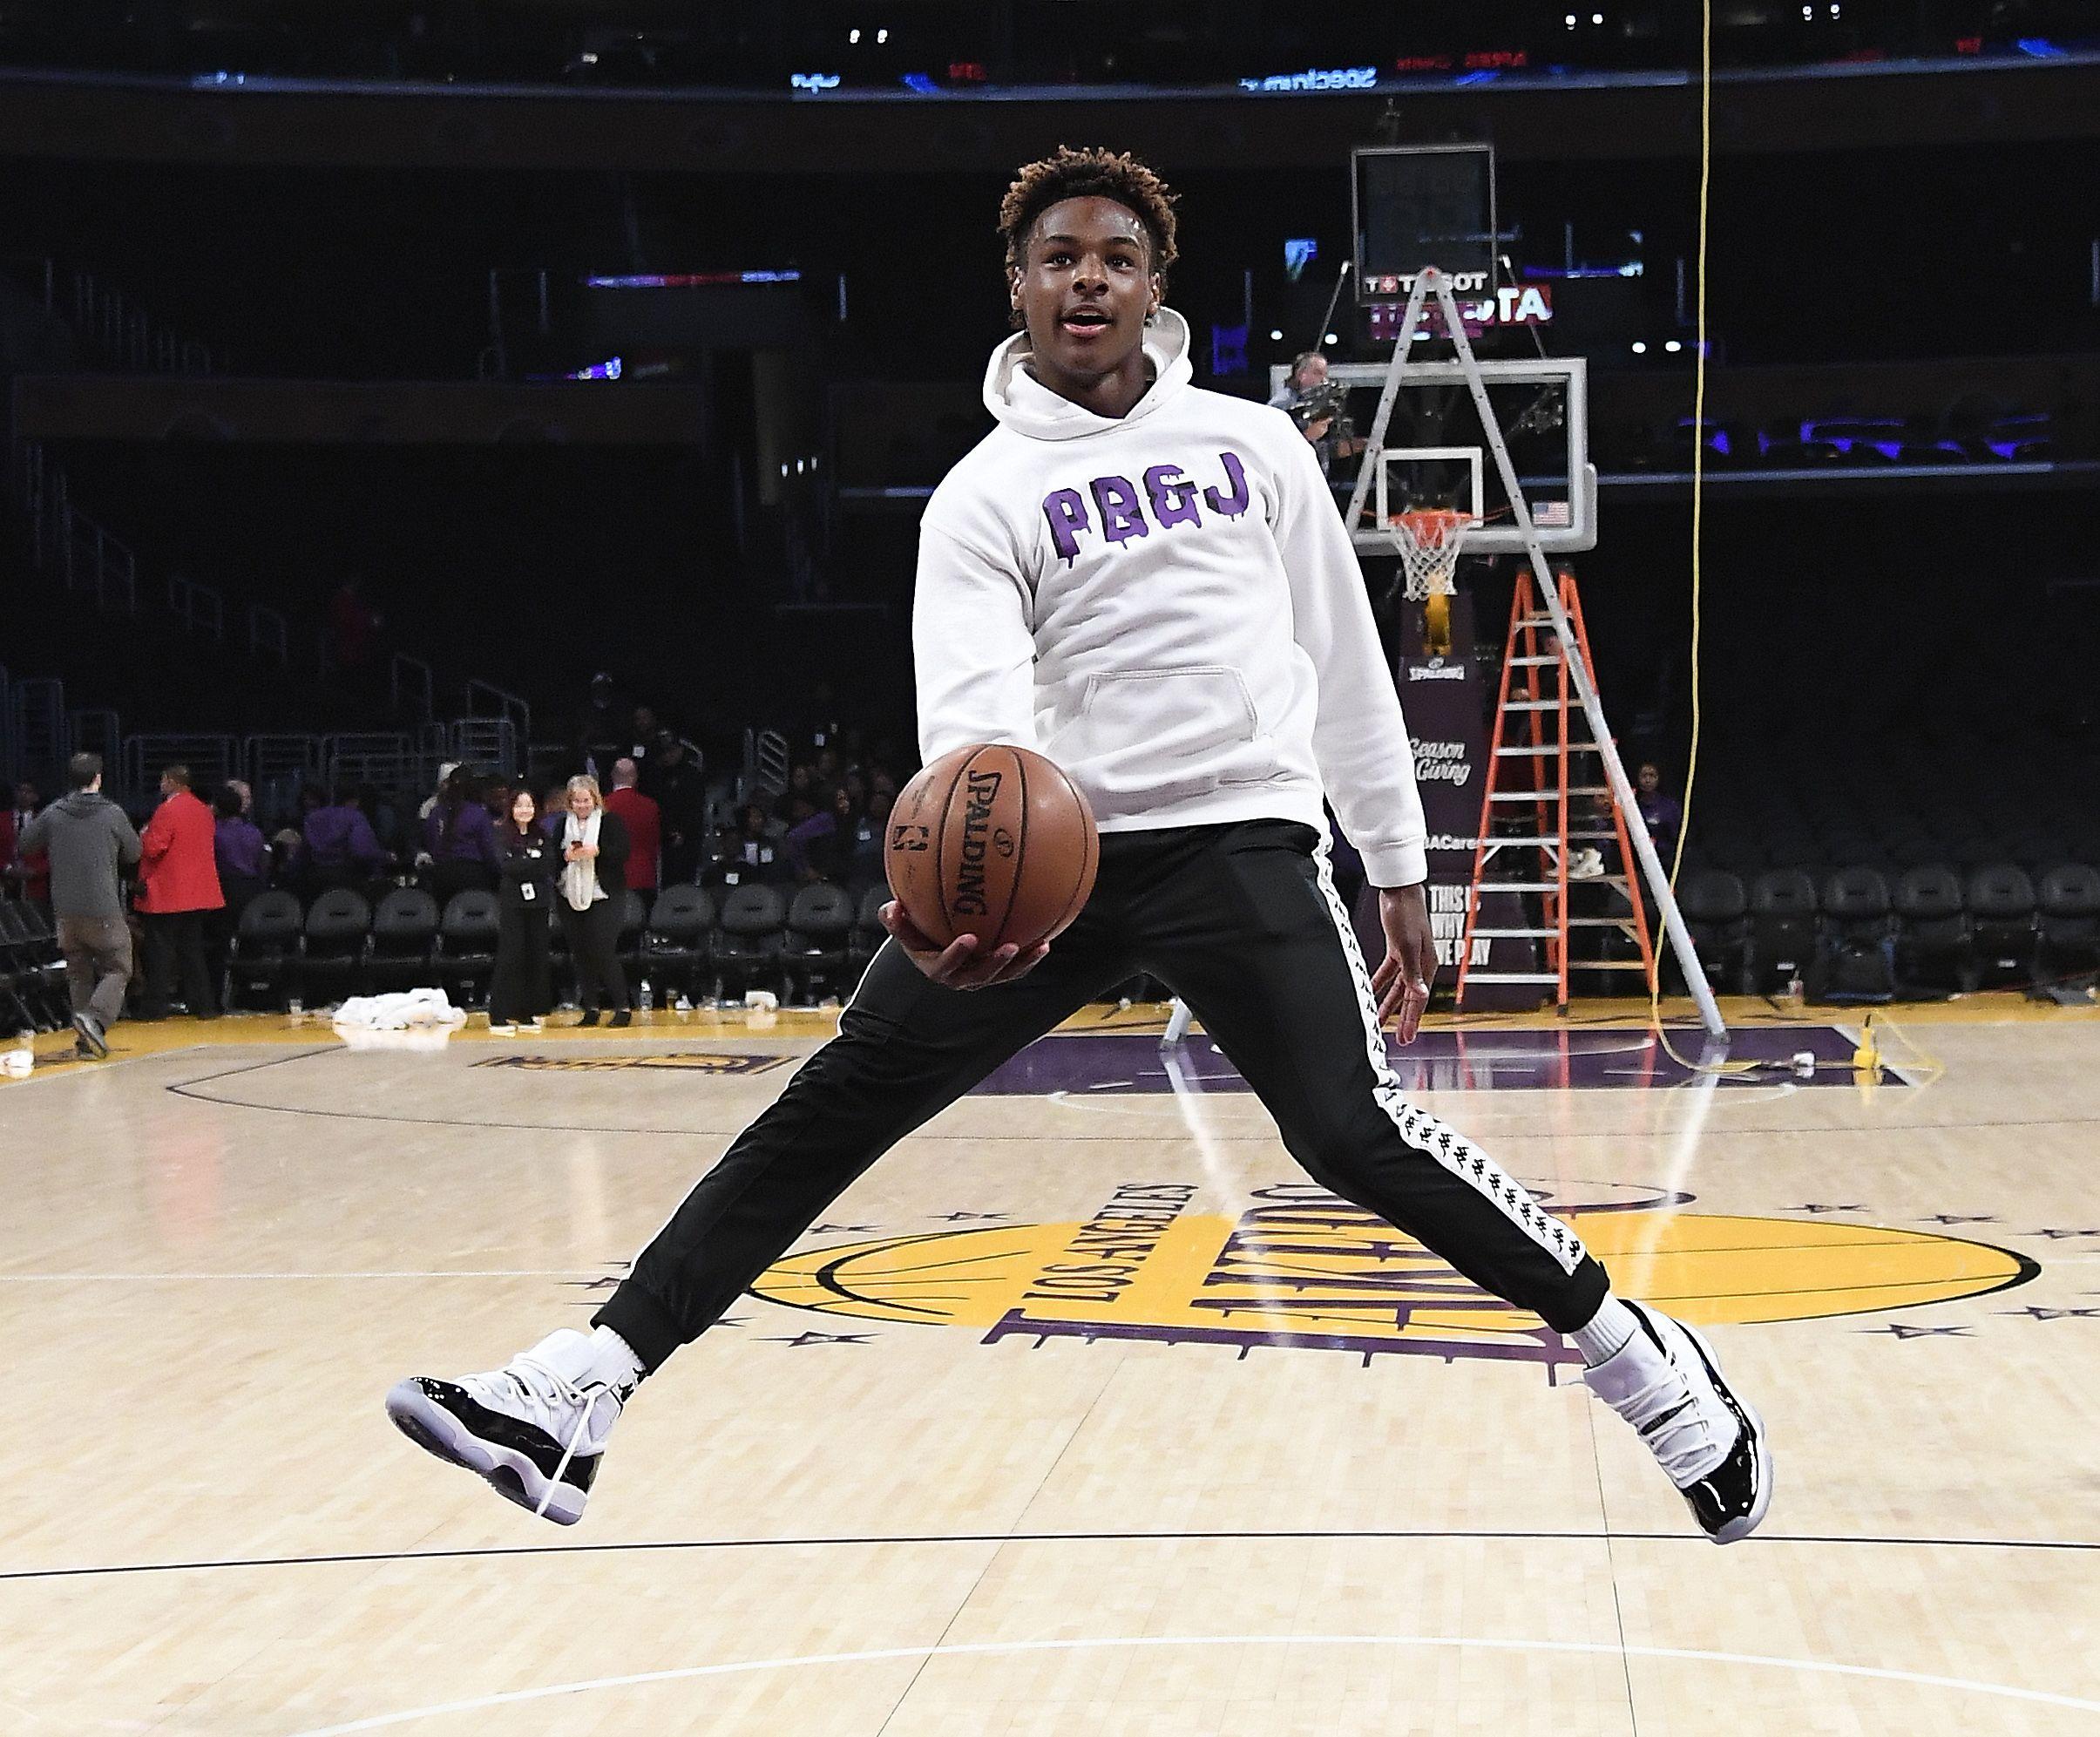 Who Is Bronny James? 1 Million Followers On Instagram Say He's